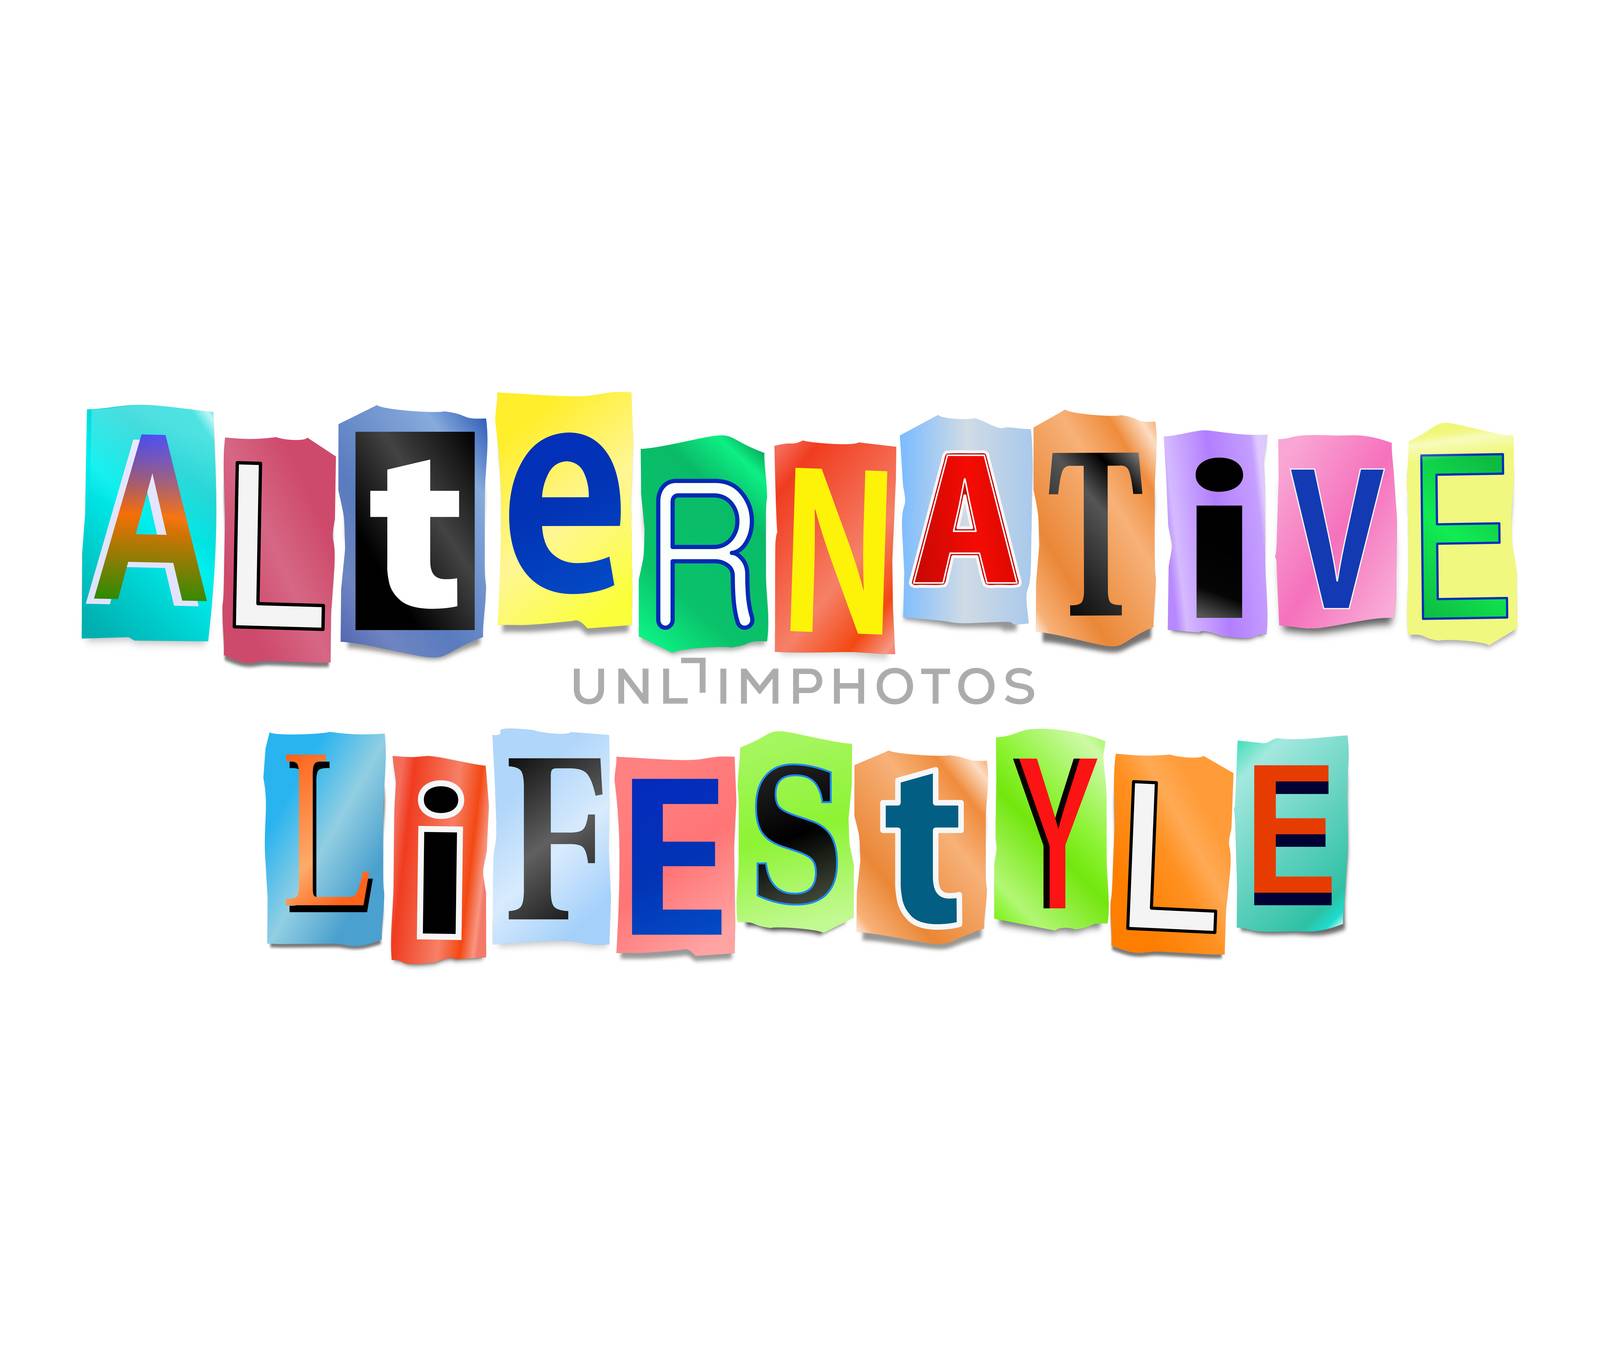 Illustration depicting a set of cut out printed letters arranged to form the words alternative lifestyle.